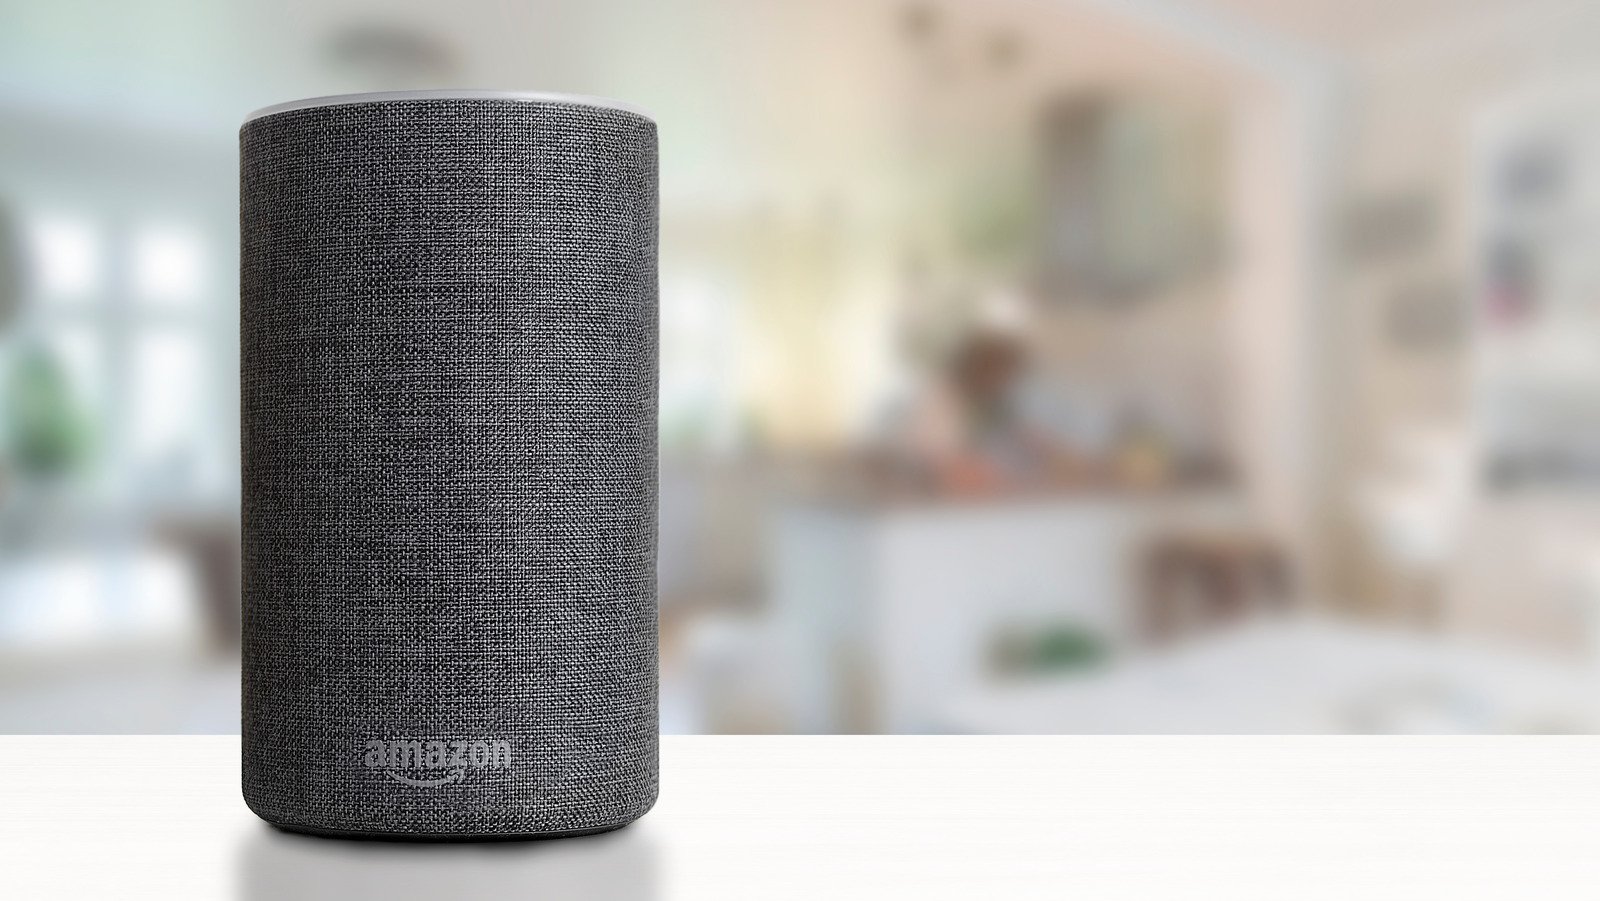 You Probably Didn't Know The Alexa In Your Home Can Do This